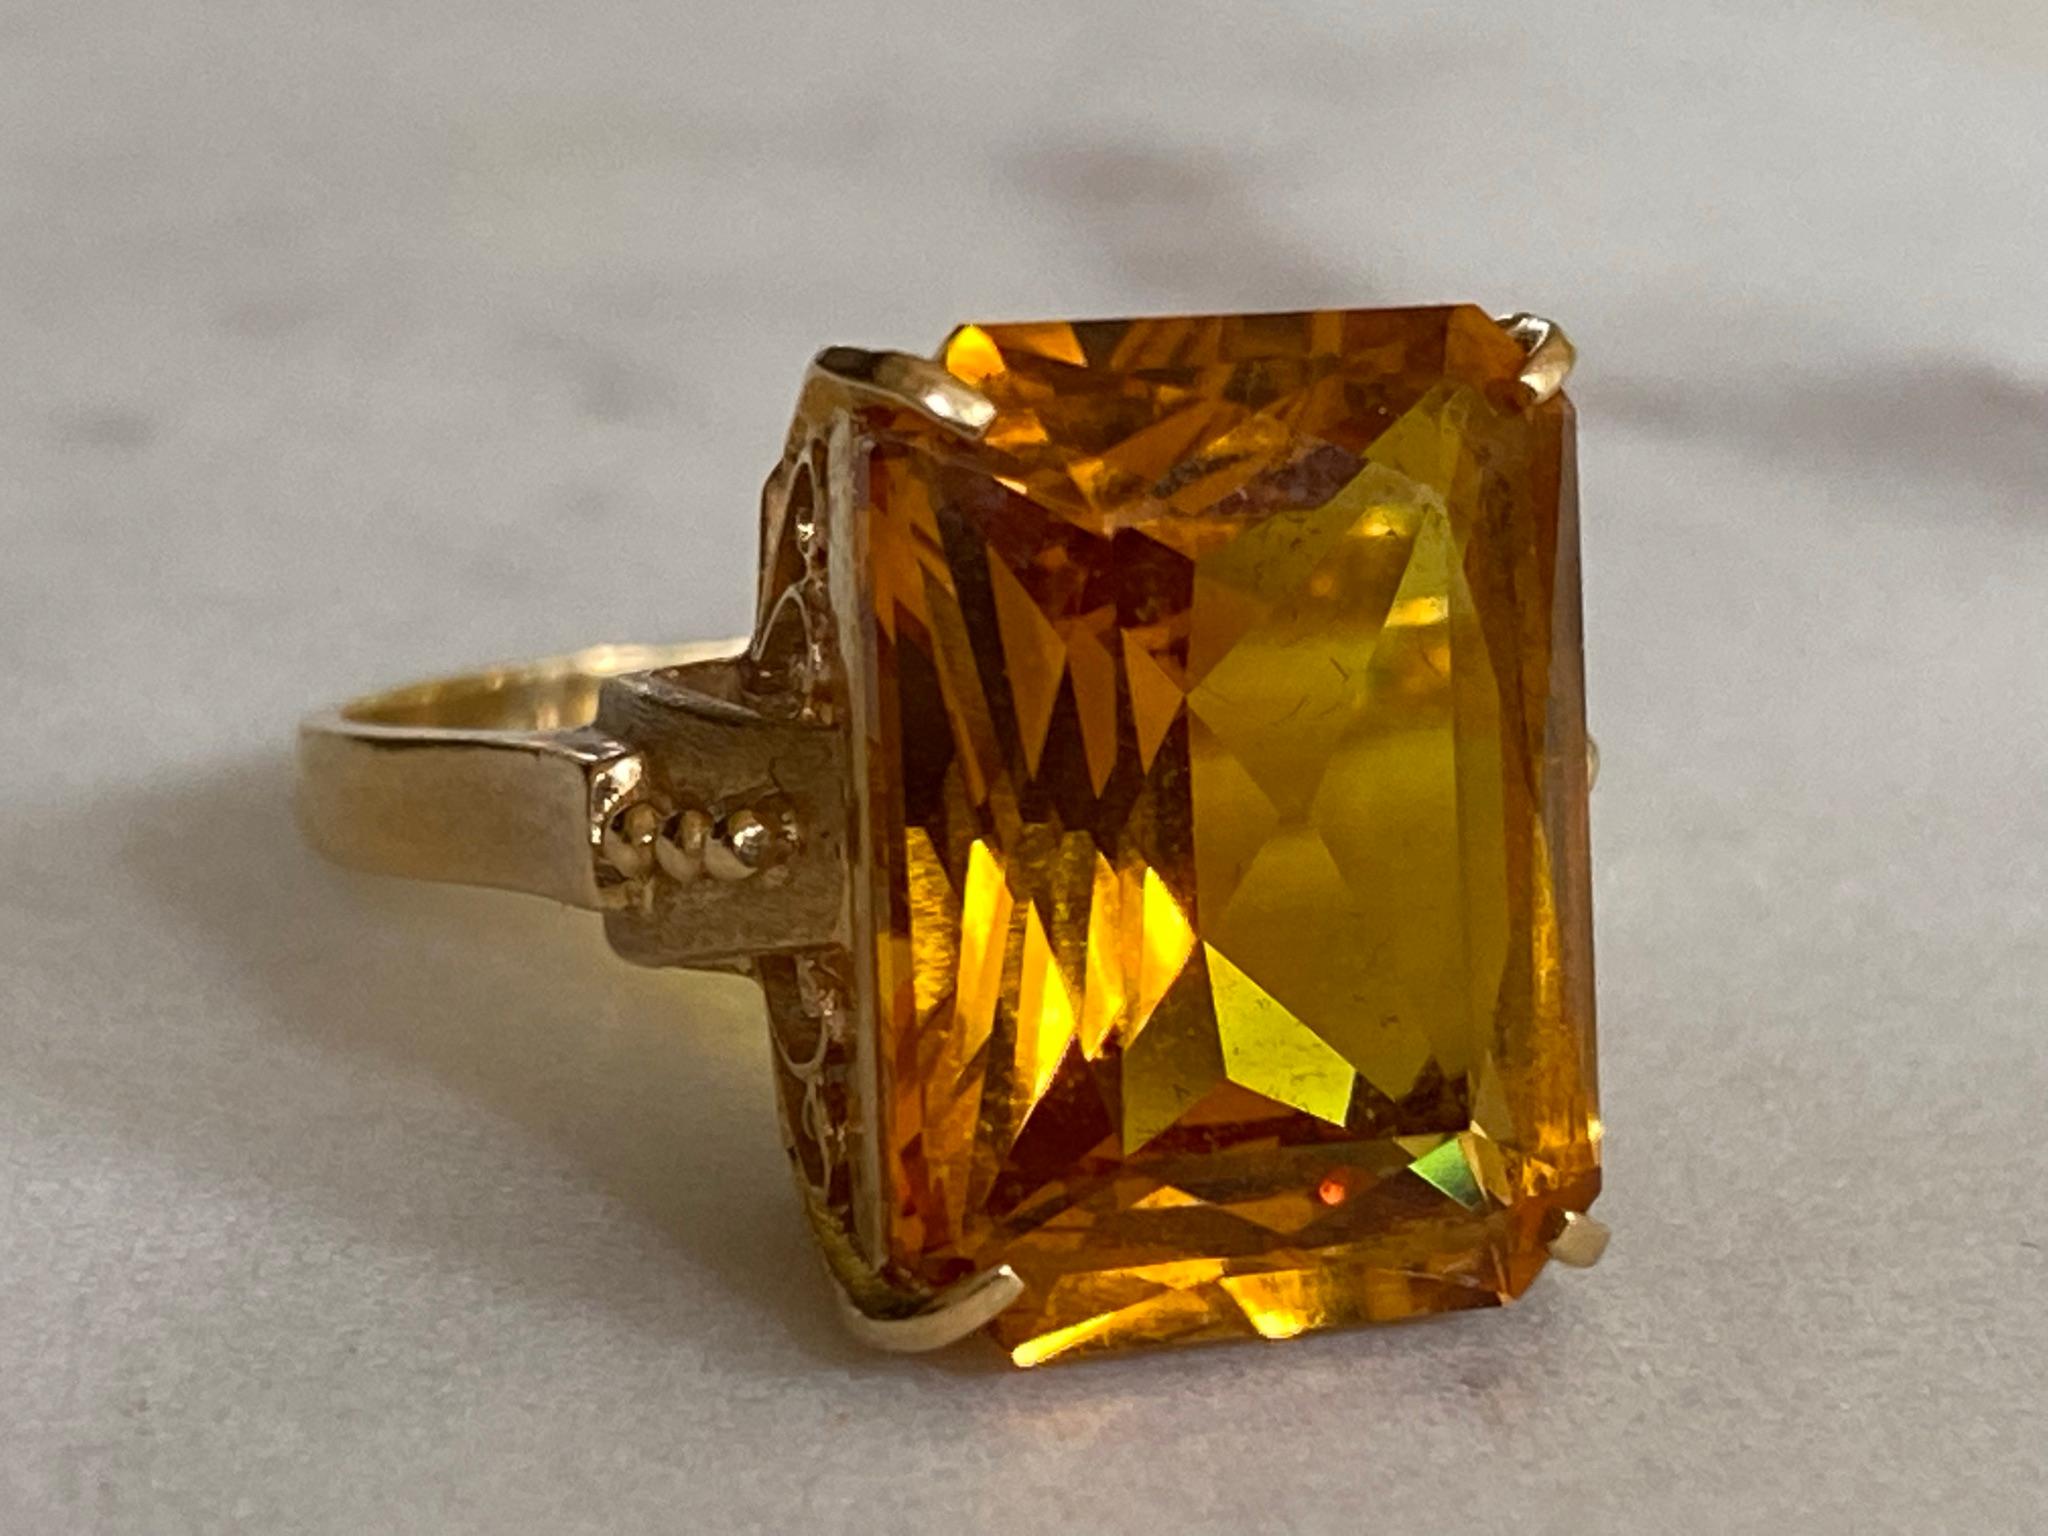 This antique cocktail ring features a large natural radiant-cut orange citrine measuring 12mm X 16mm set in an ornate, scrolling openwork gallery fashioned from 18kt yellow gold. Circa late 19th century with European stamps. 
